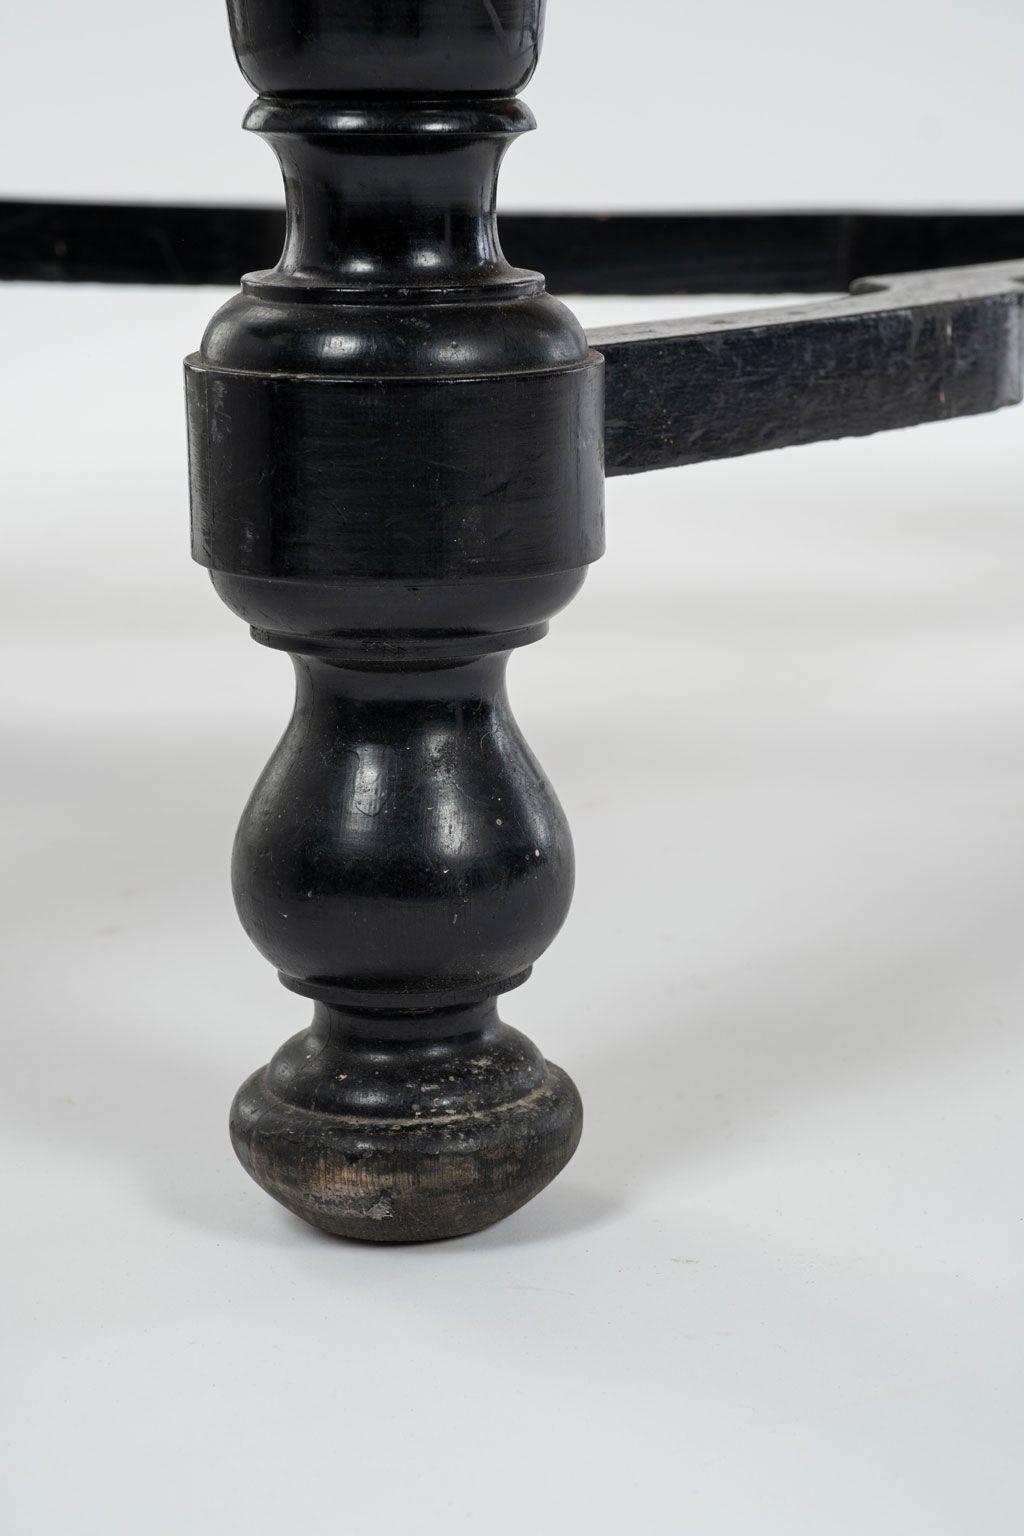 Neoclassical ebonized Swedish console table hand-carved in Second Empire, or Napoleon III style. Original black painted finish, robust turned legs connected by shaped X-stretcher with upright center finial. Hand-carved and painted in the 1860s for